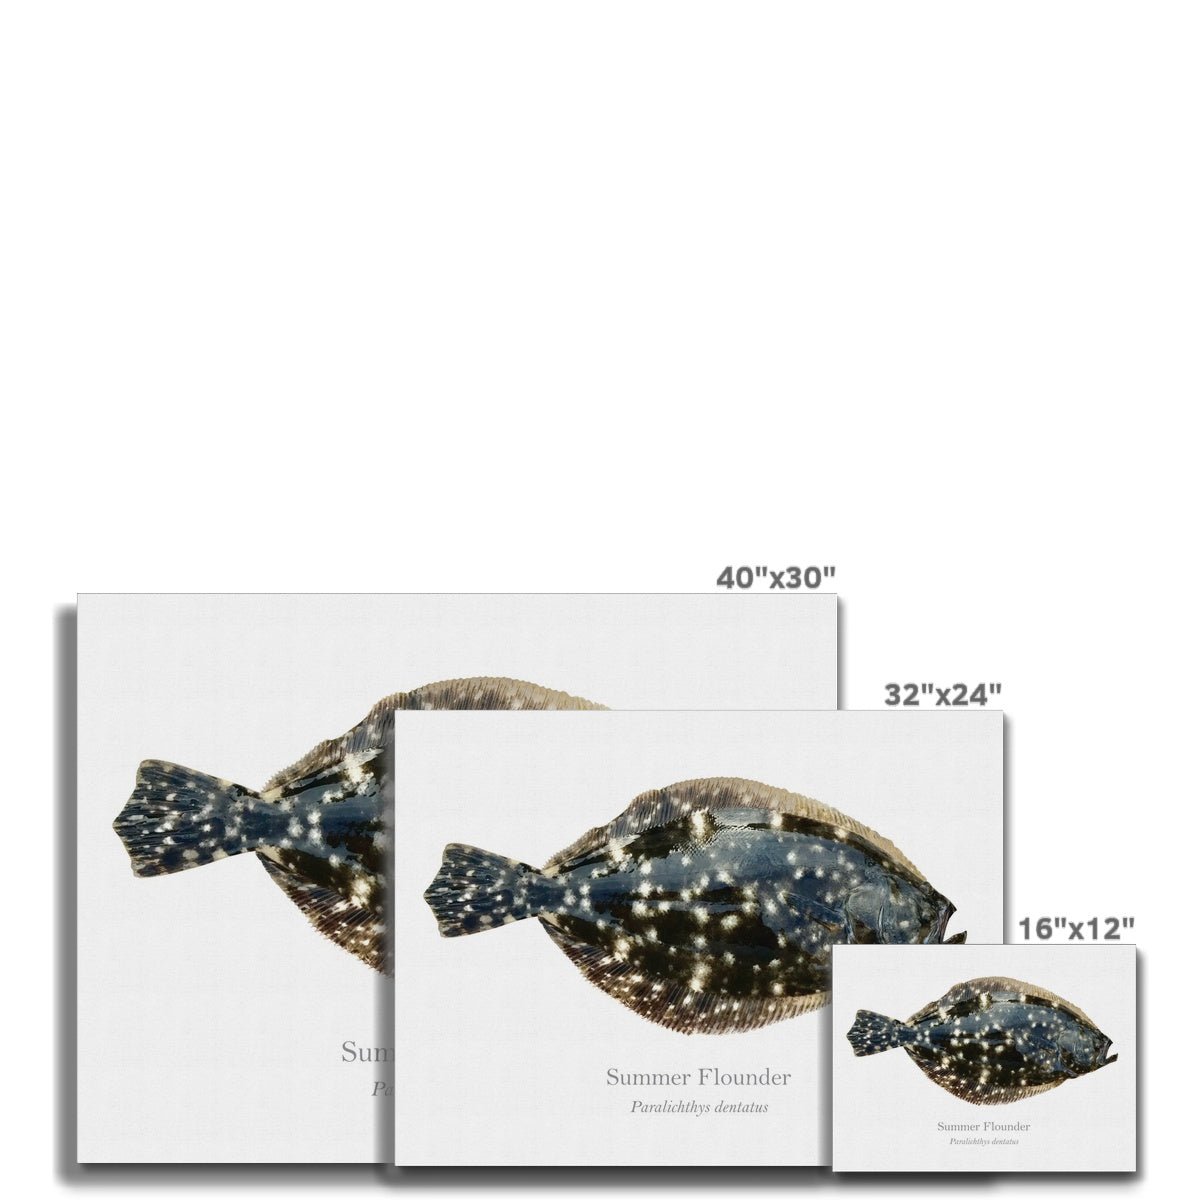 Summer Flounder - Canvas Print - With Scientific Name - madfishlab.com